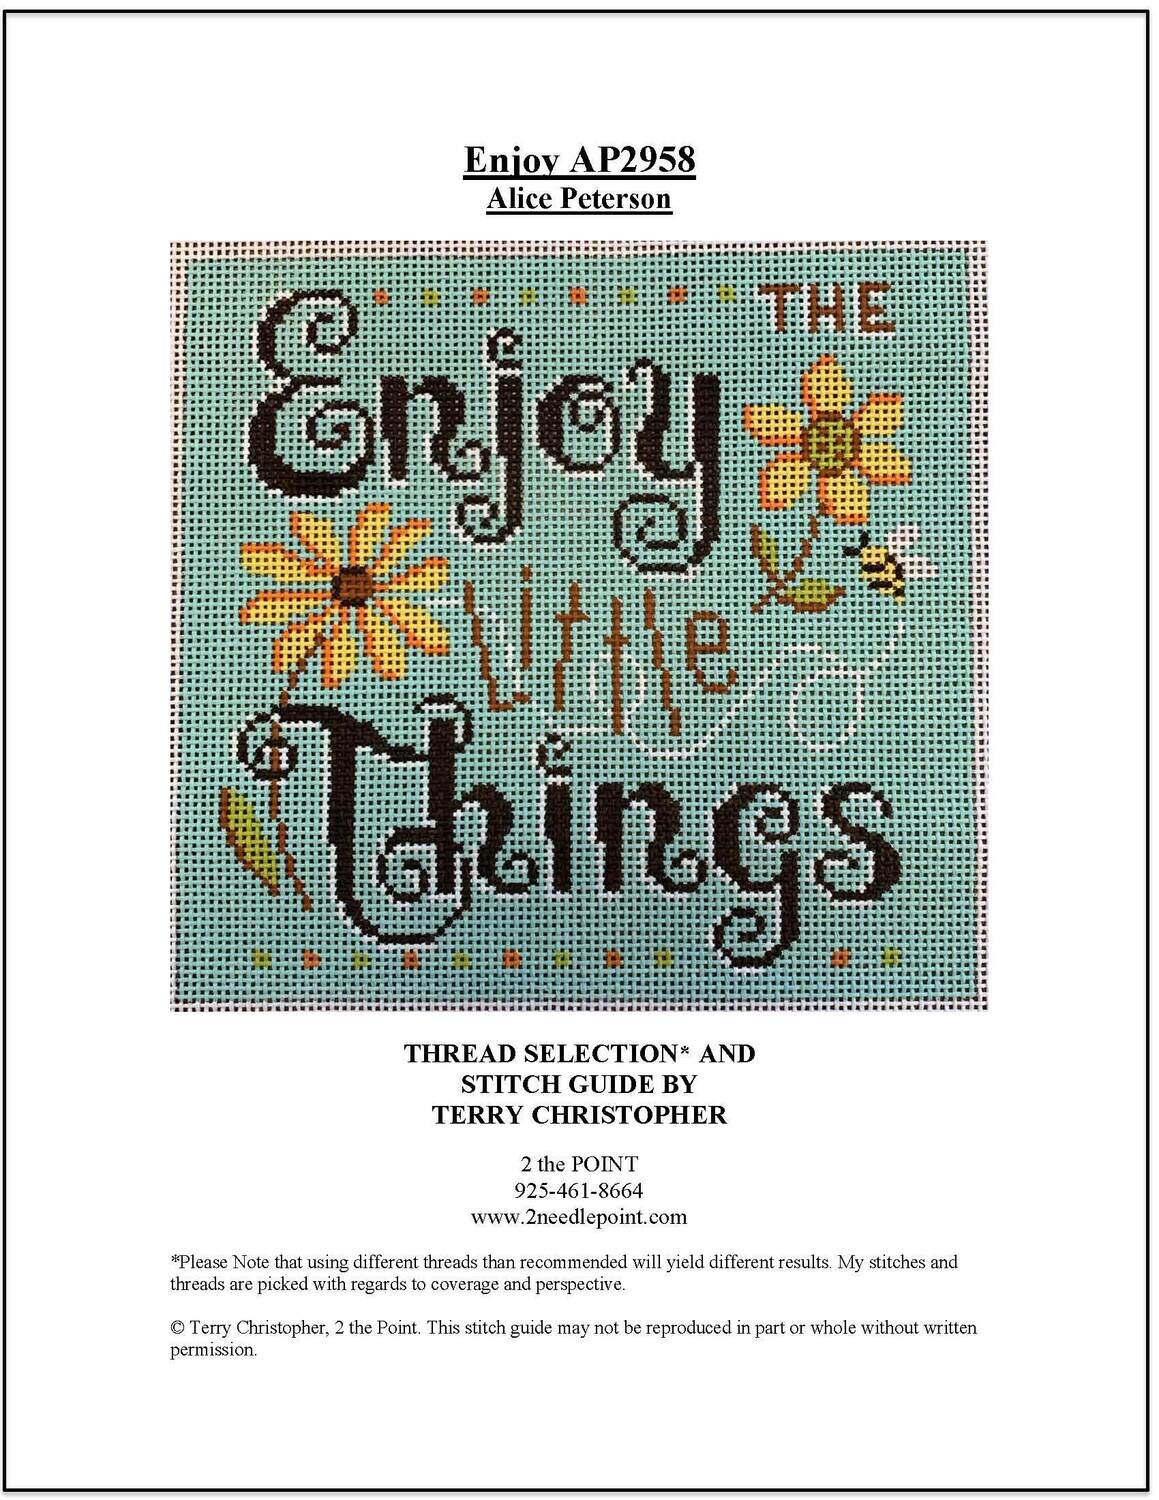 Alice Peterson, AP2958 Enjoy the Little Things